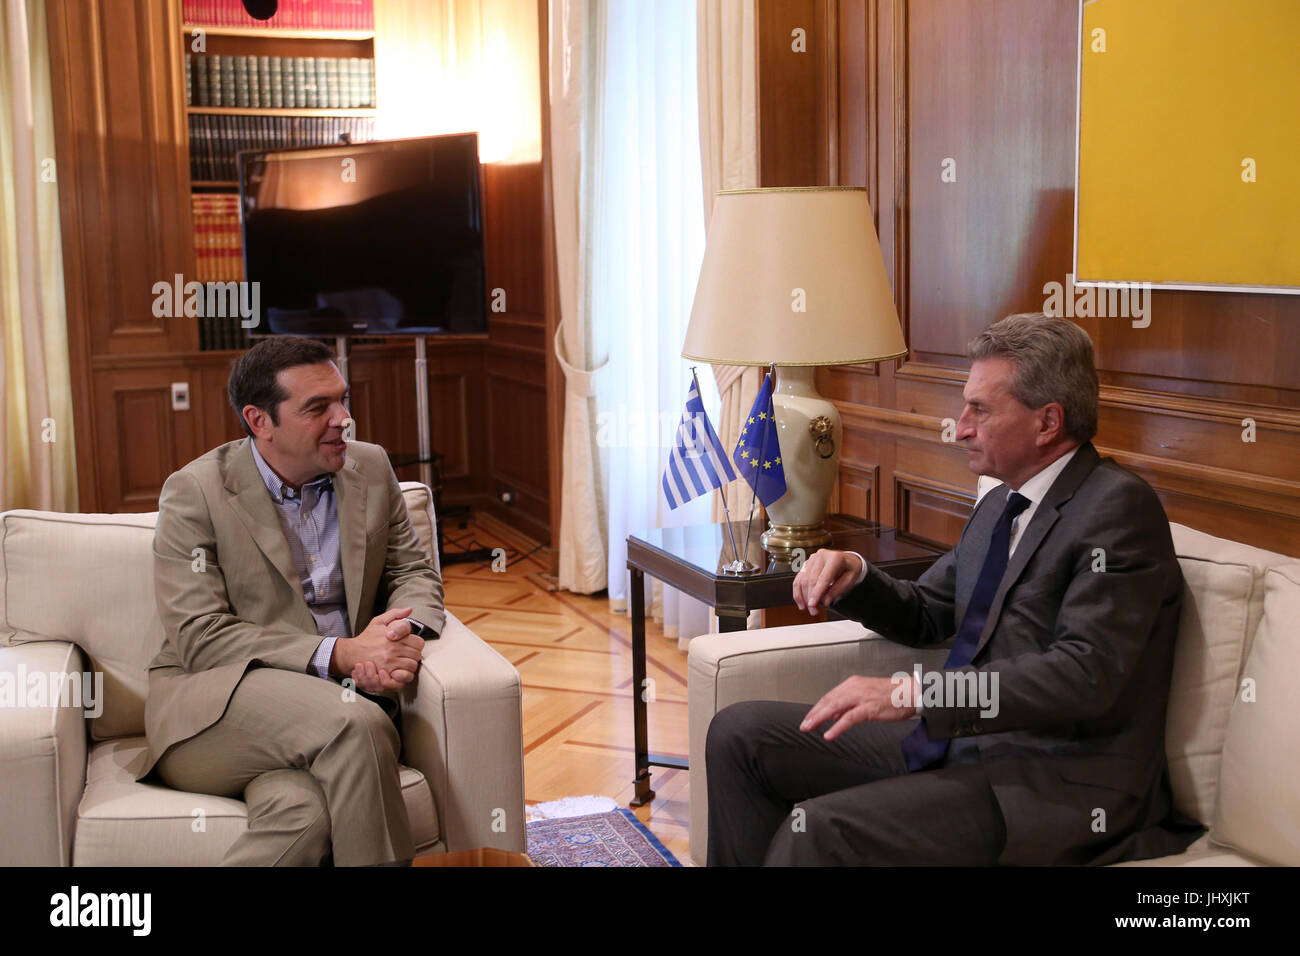 Athens, Greece. 17th July, 2017. Greek Prime Minister Alexis Tsipras (L) meets with European Commissioner for budget and human resources Gunther Oettinger in Athens, Greece, July 17, 2017. Credit: Marios Lolos/Xinhua/Alamy Live News Stock Photo